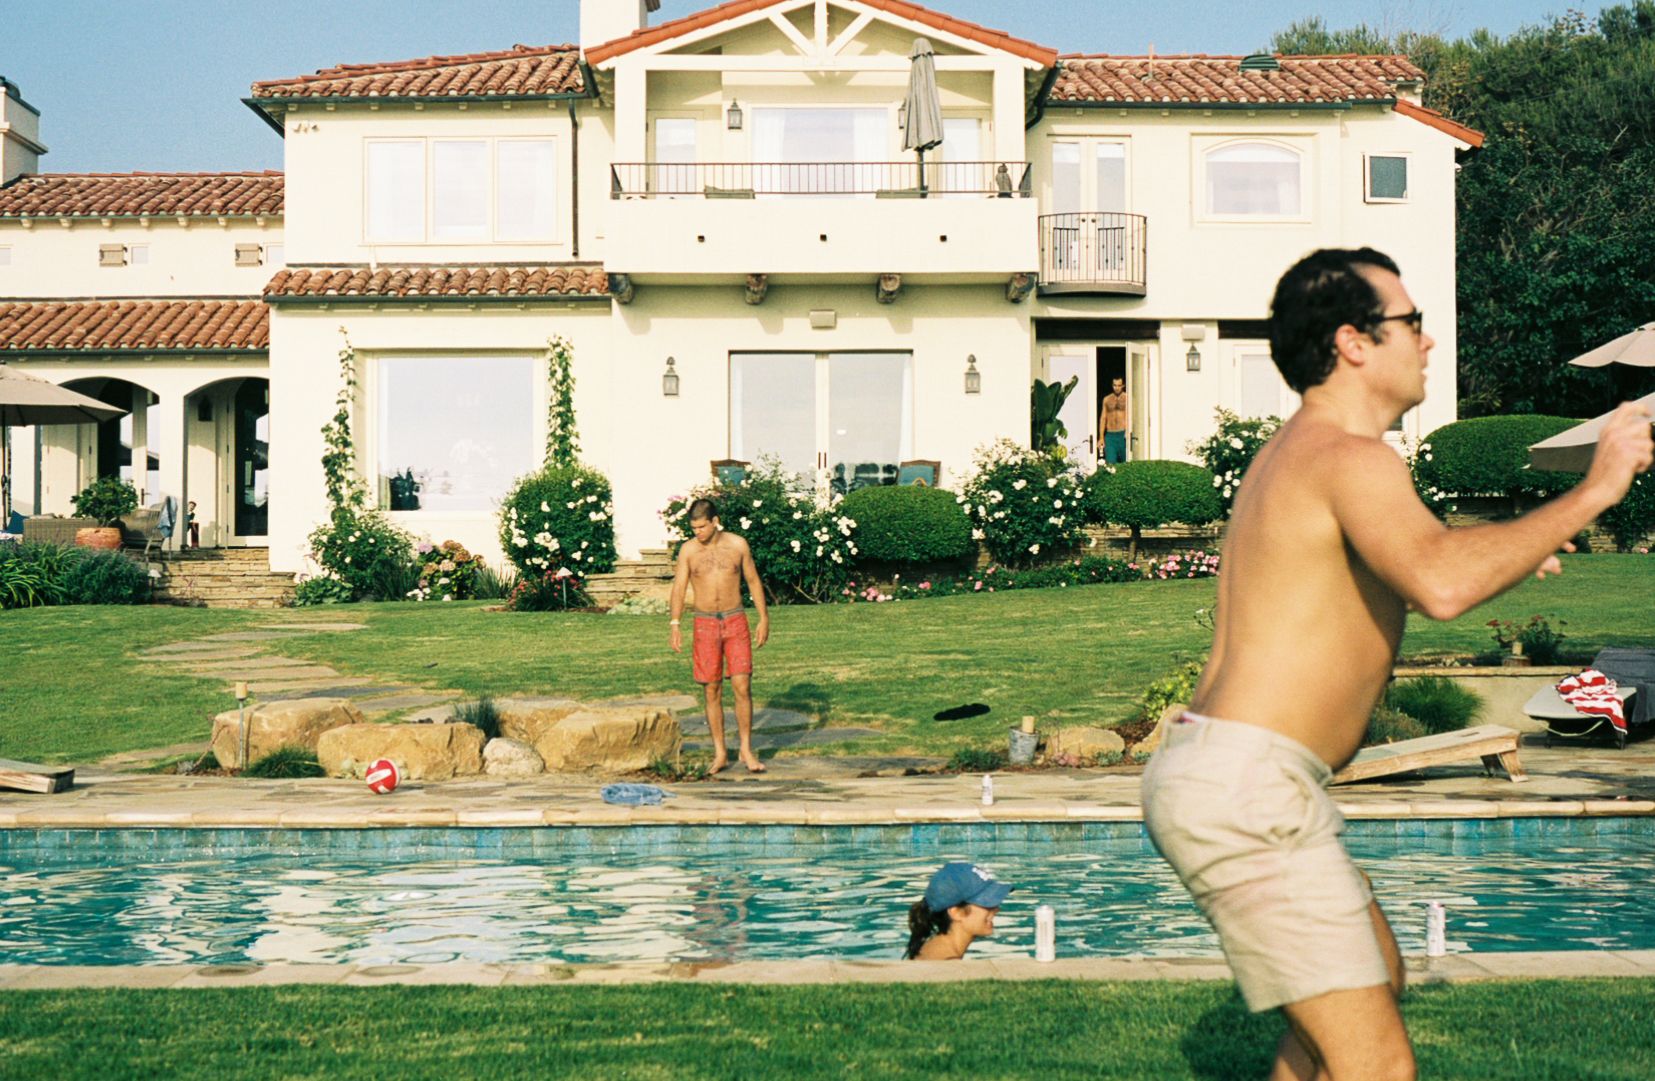 A view of the back of a house with a tile roof in California. In the foreground, a woman swims in a pool and a man catches a frisbee.